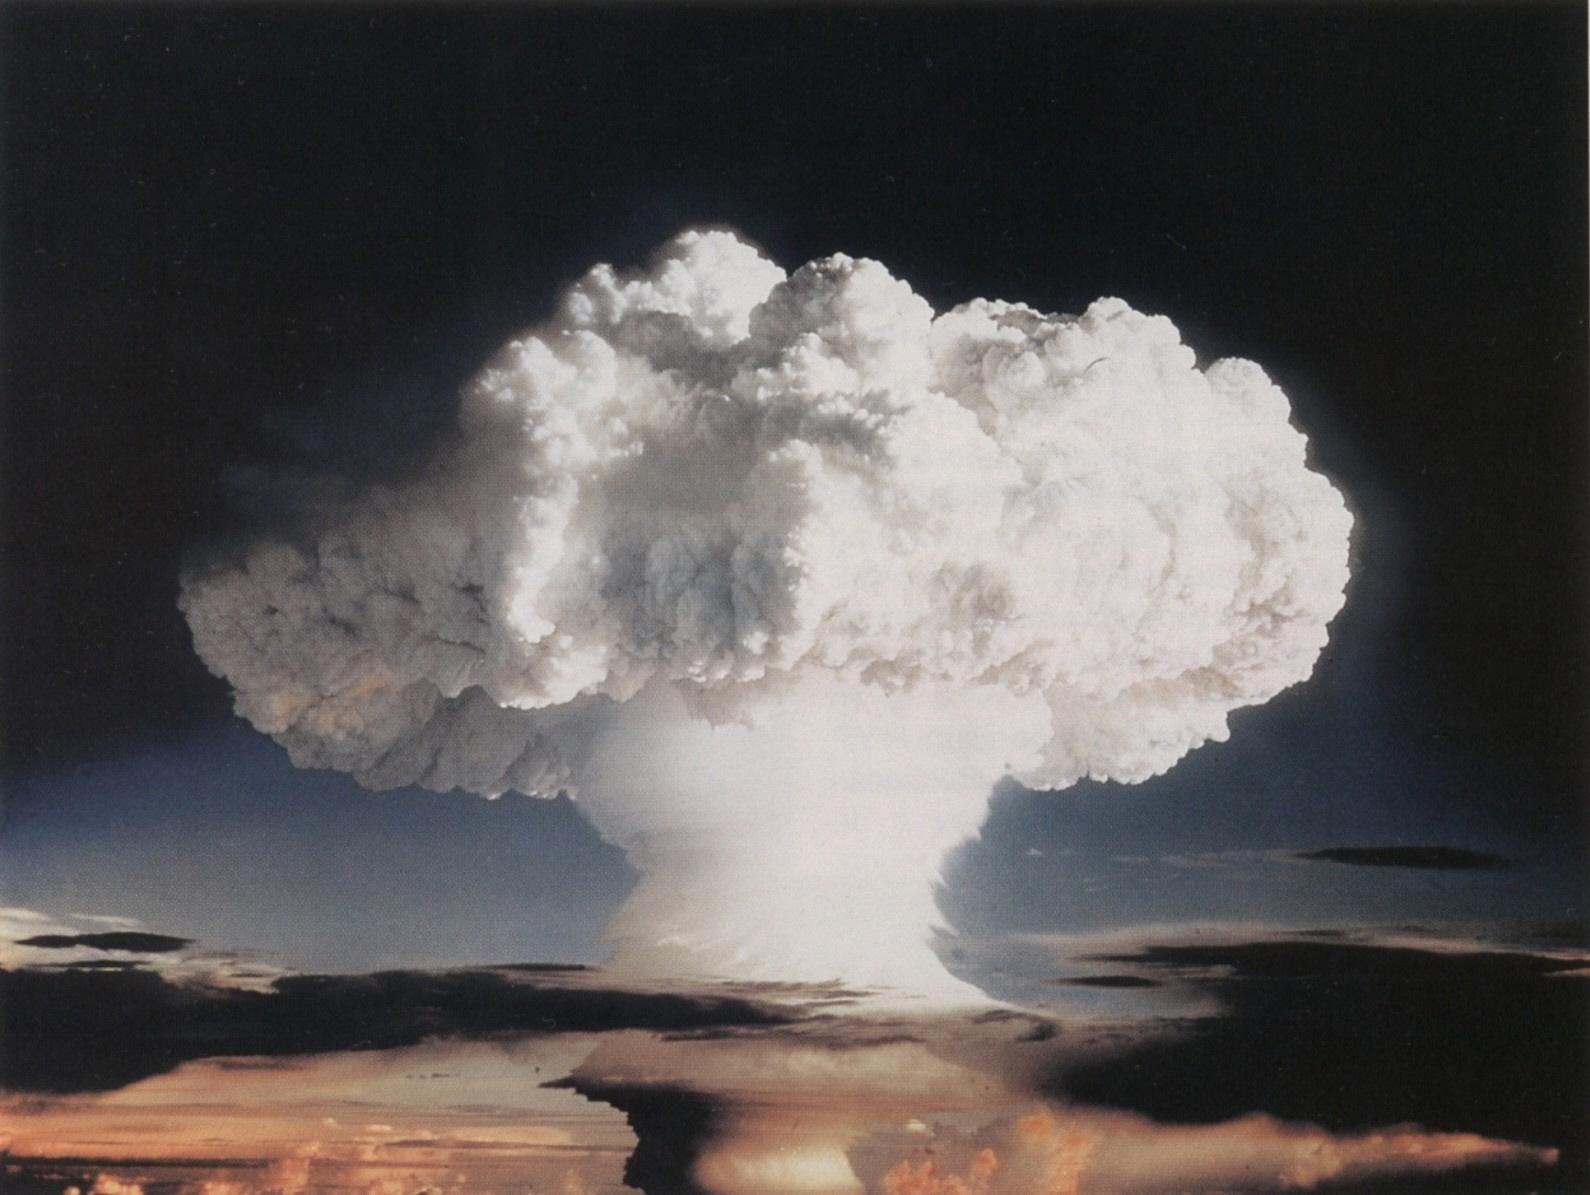 The US “Ivy Mike” atmospheric nuclear test in November, 1952 (Photo: CTBTO/Flickr)